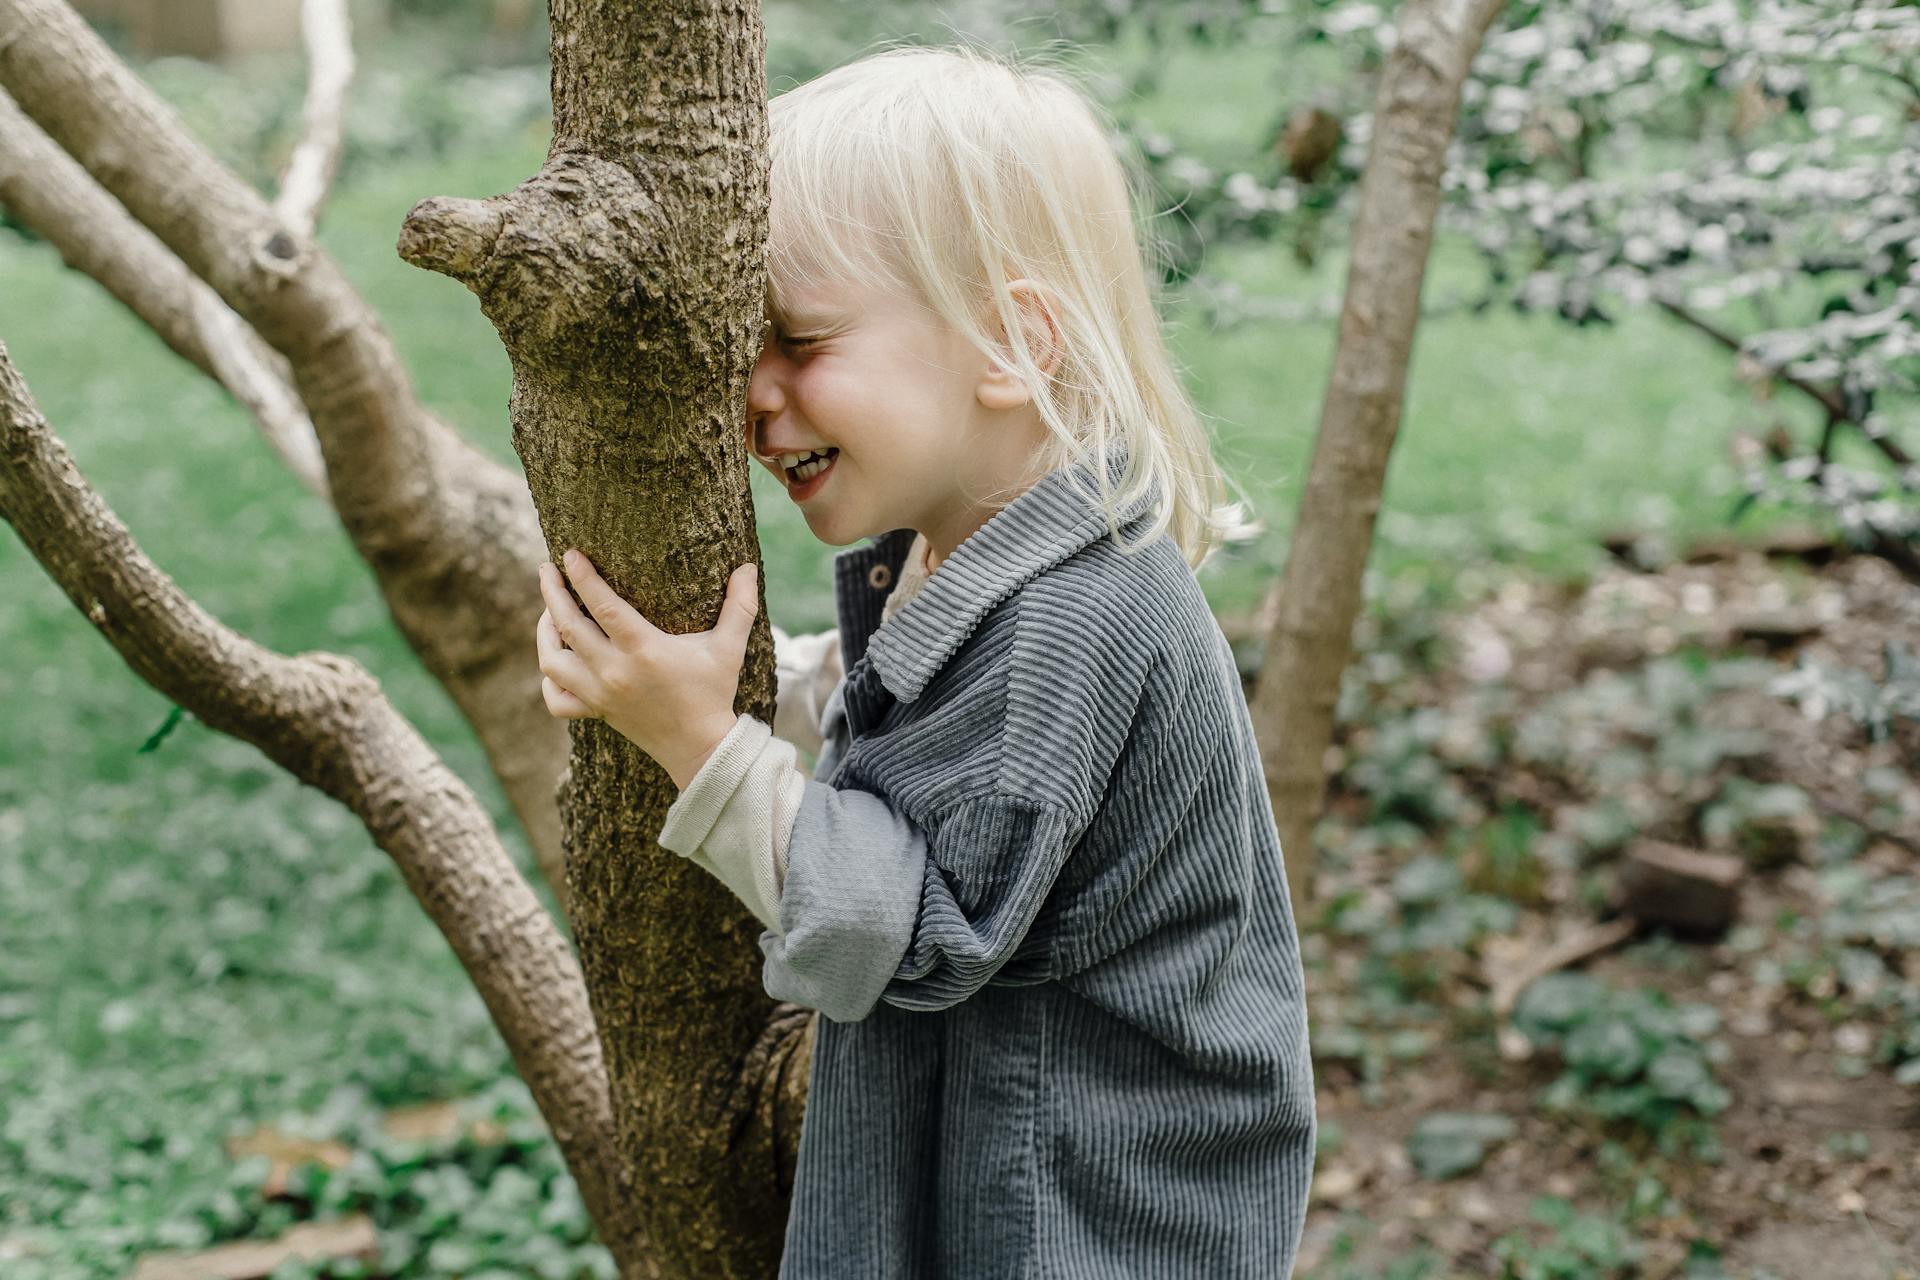 A little boy holding a tree | Source: Pexels